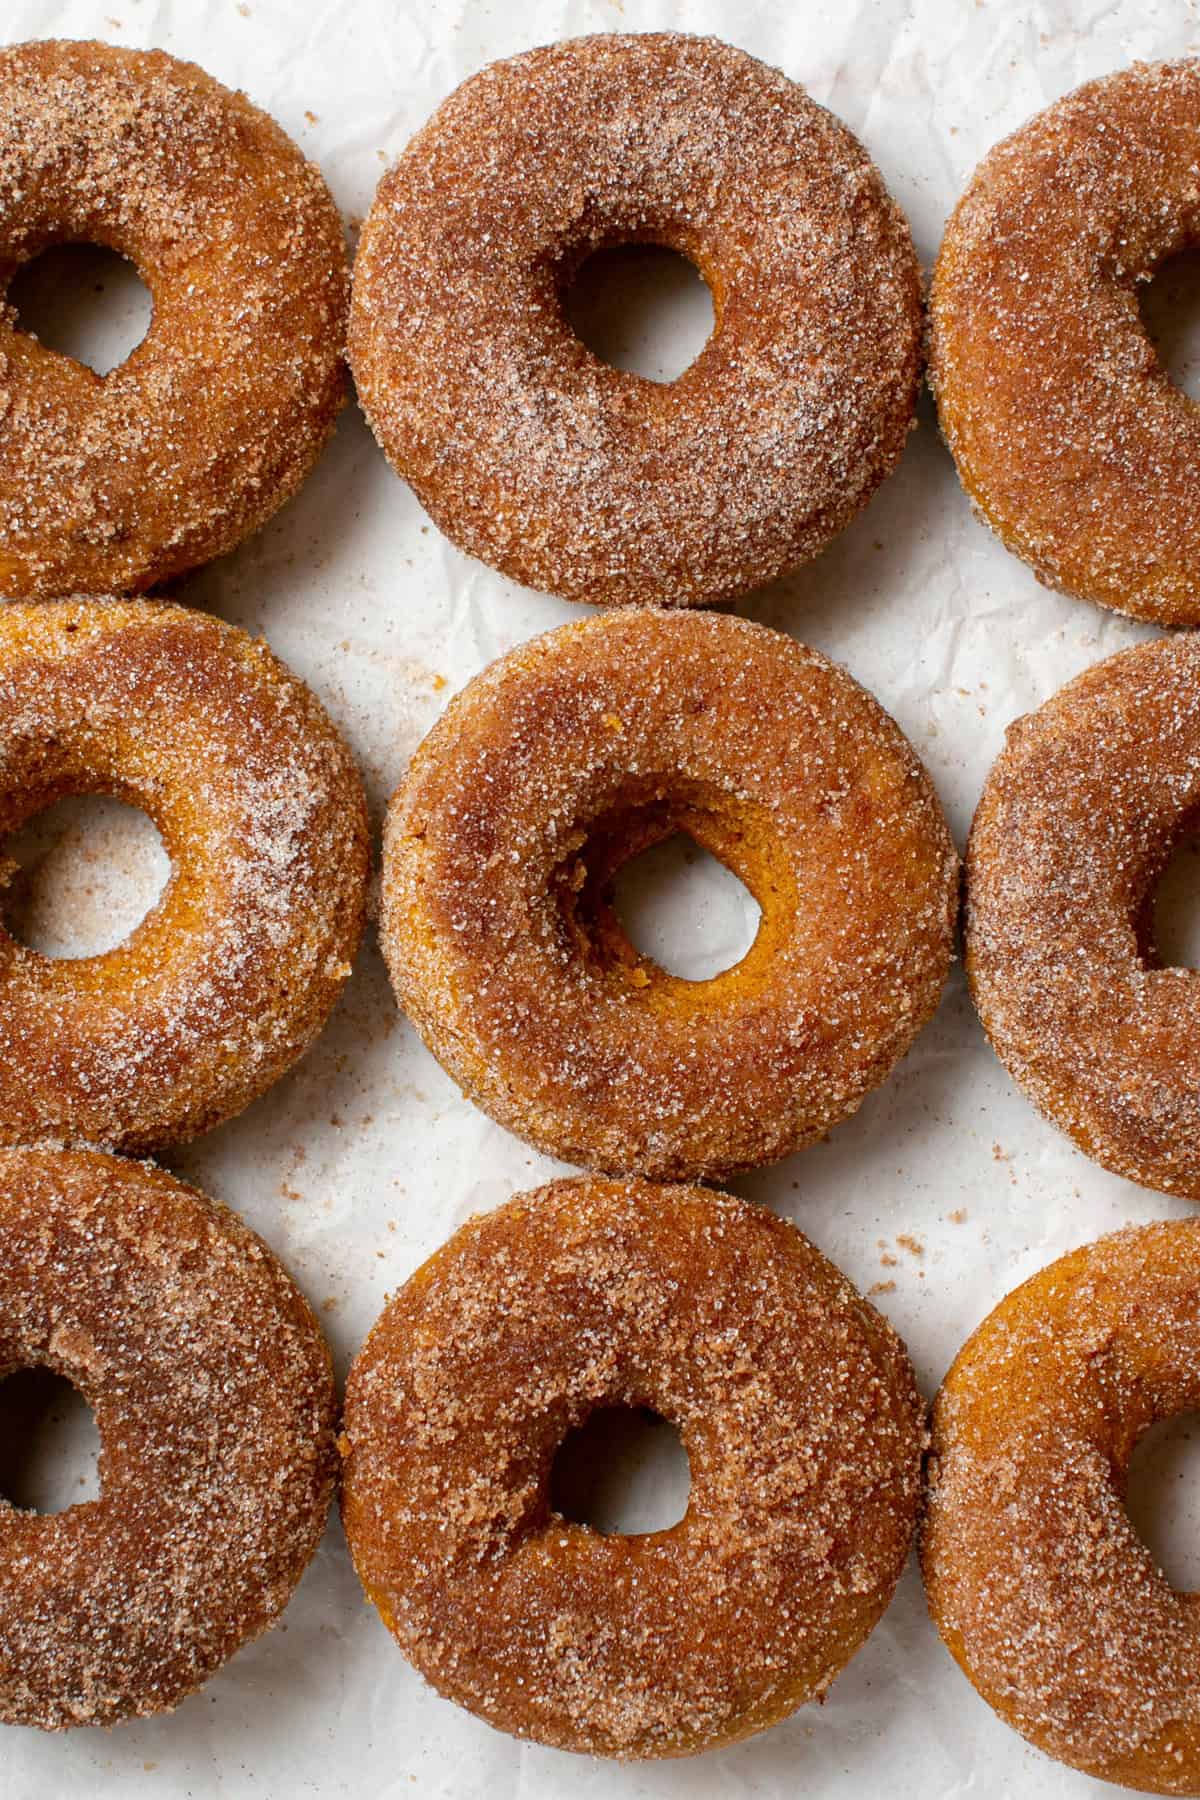 the cinnamon sugar pumpkin donuts sitting on a piece of parchment paper.